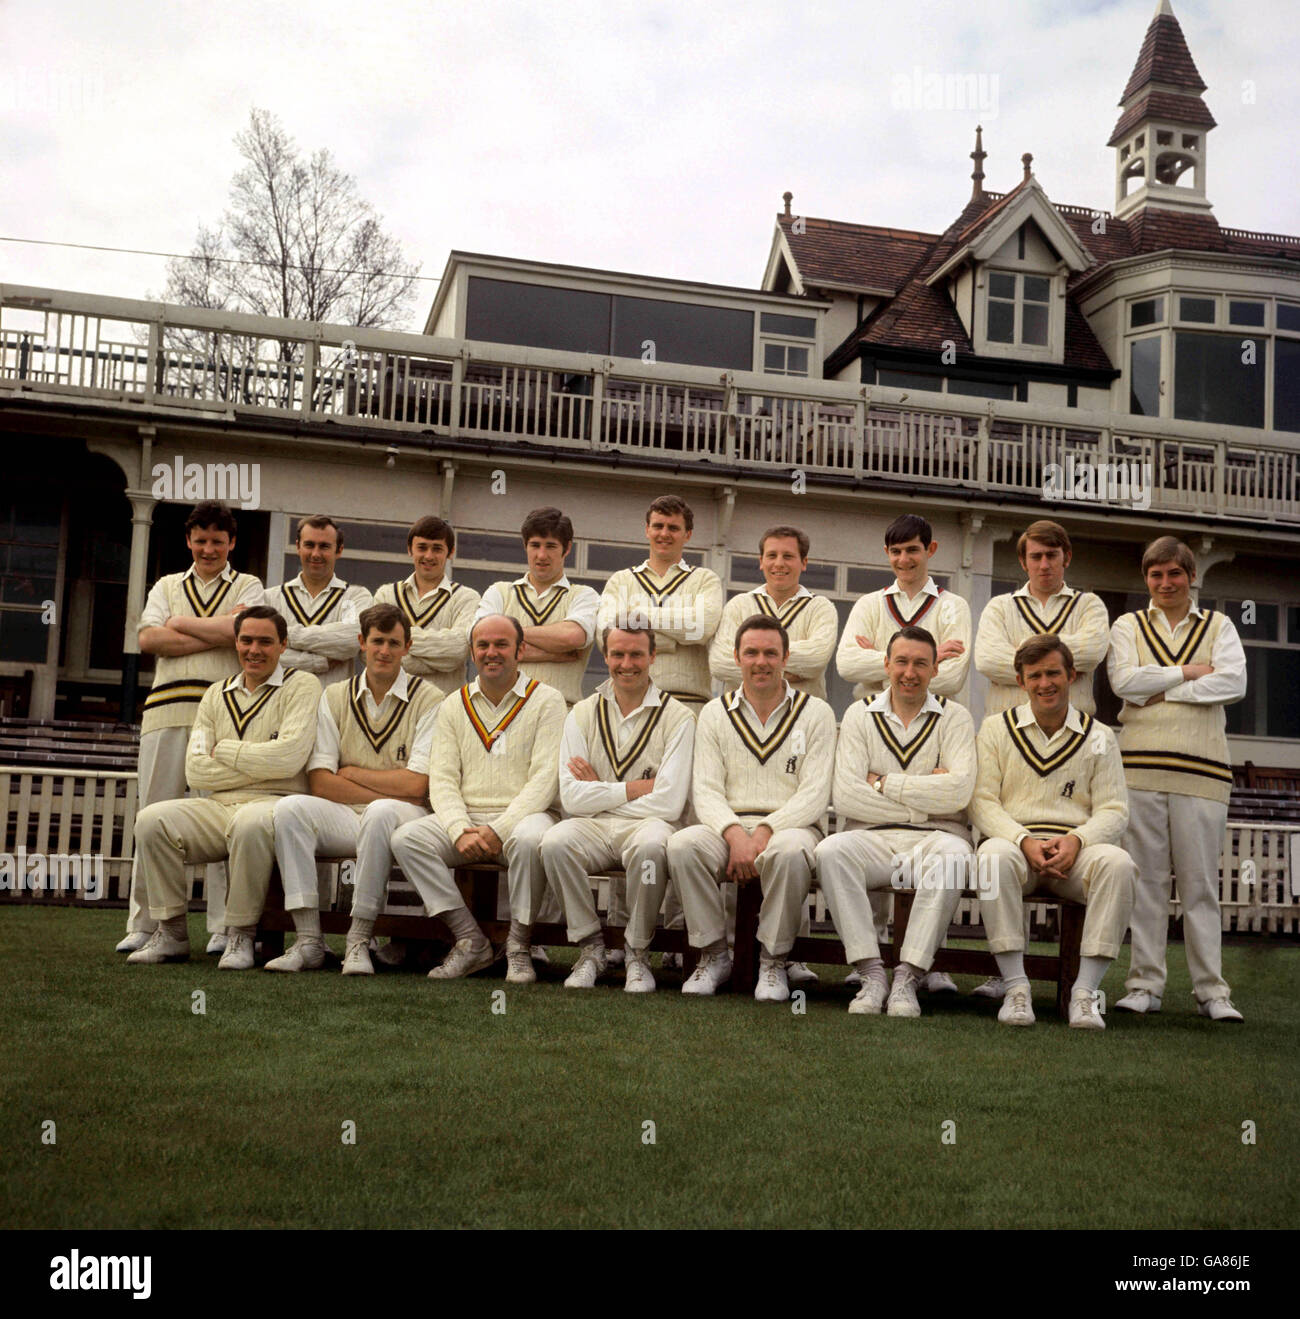 Warwickshire County Cricket Club Back Row: Flick, Abberley, Warner, Grey, Blenkiron. Gordon, McVicker, Hemmings, Bayley. Front Row: Jameson, Brown, Stewart, Smith (Captain), Bannister, Cartwright and Amiss. Stock Photo